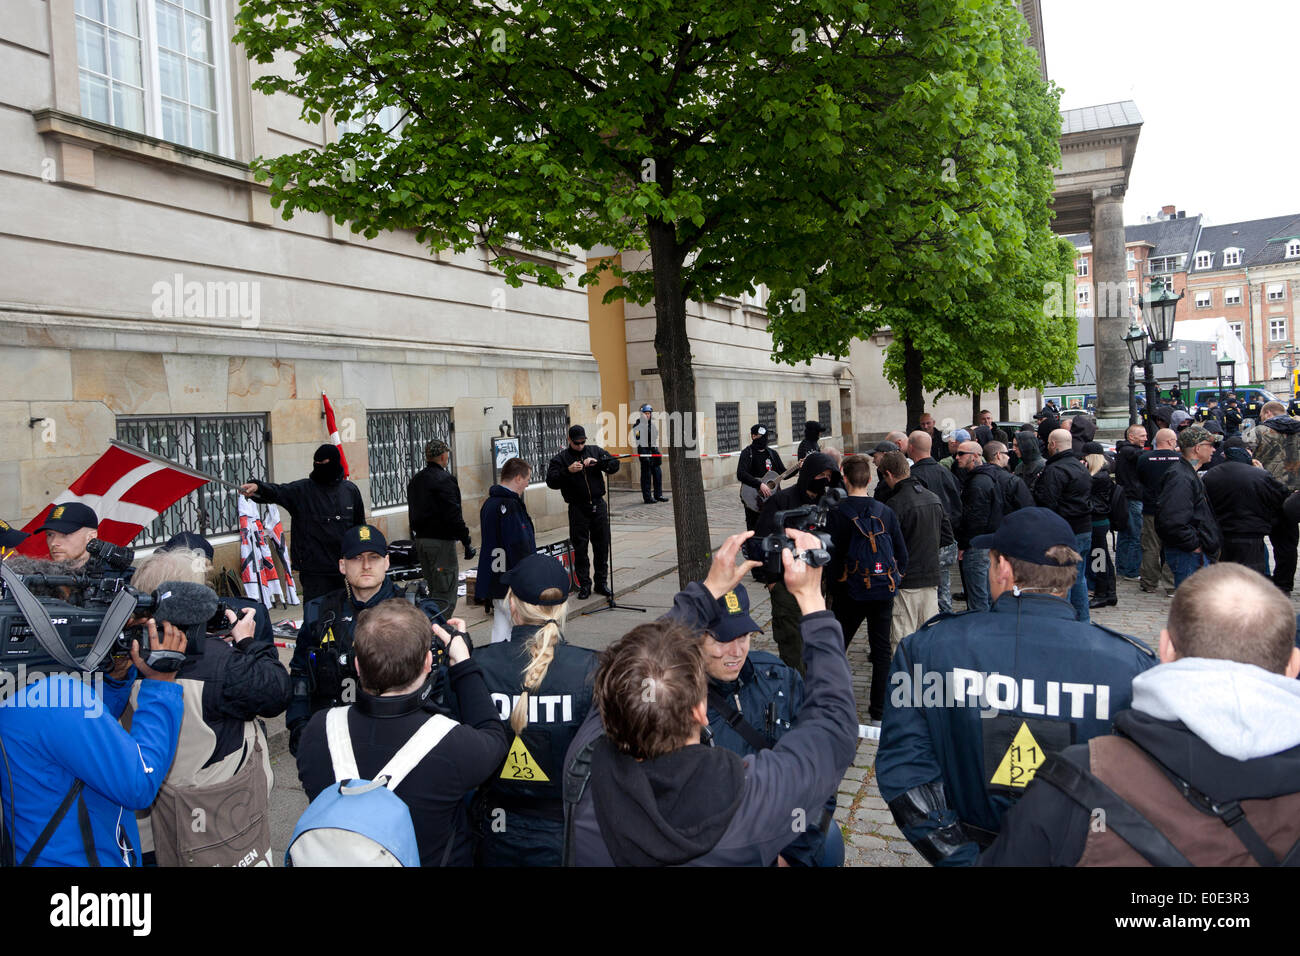 Copenhagen, Denmark. 10th May, 2014. Danish neo-Nazi party (Denmark's National Front, DNF) demonstration in front of the parliament under the slogan: “No to Islamization” took place under heavy police protection and was finally interrupted by an anti fascist counter-demonstration. Eventually police cleared the square. This took place just a few hours before the Eurovision Song Contest final. Credit:  OJPHOTOS/Alamy Live News Stock Photo